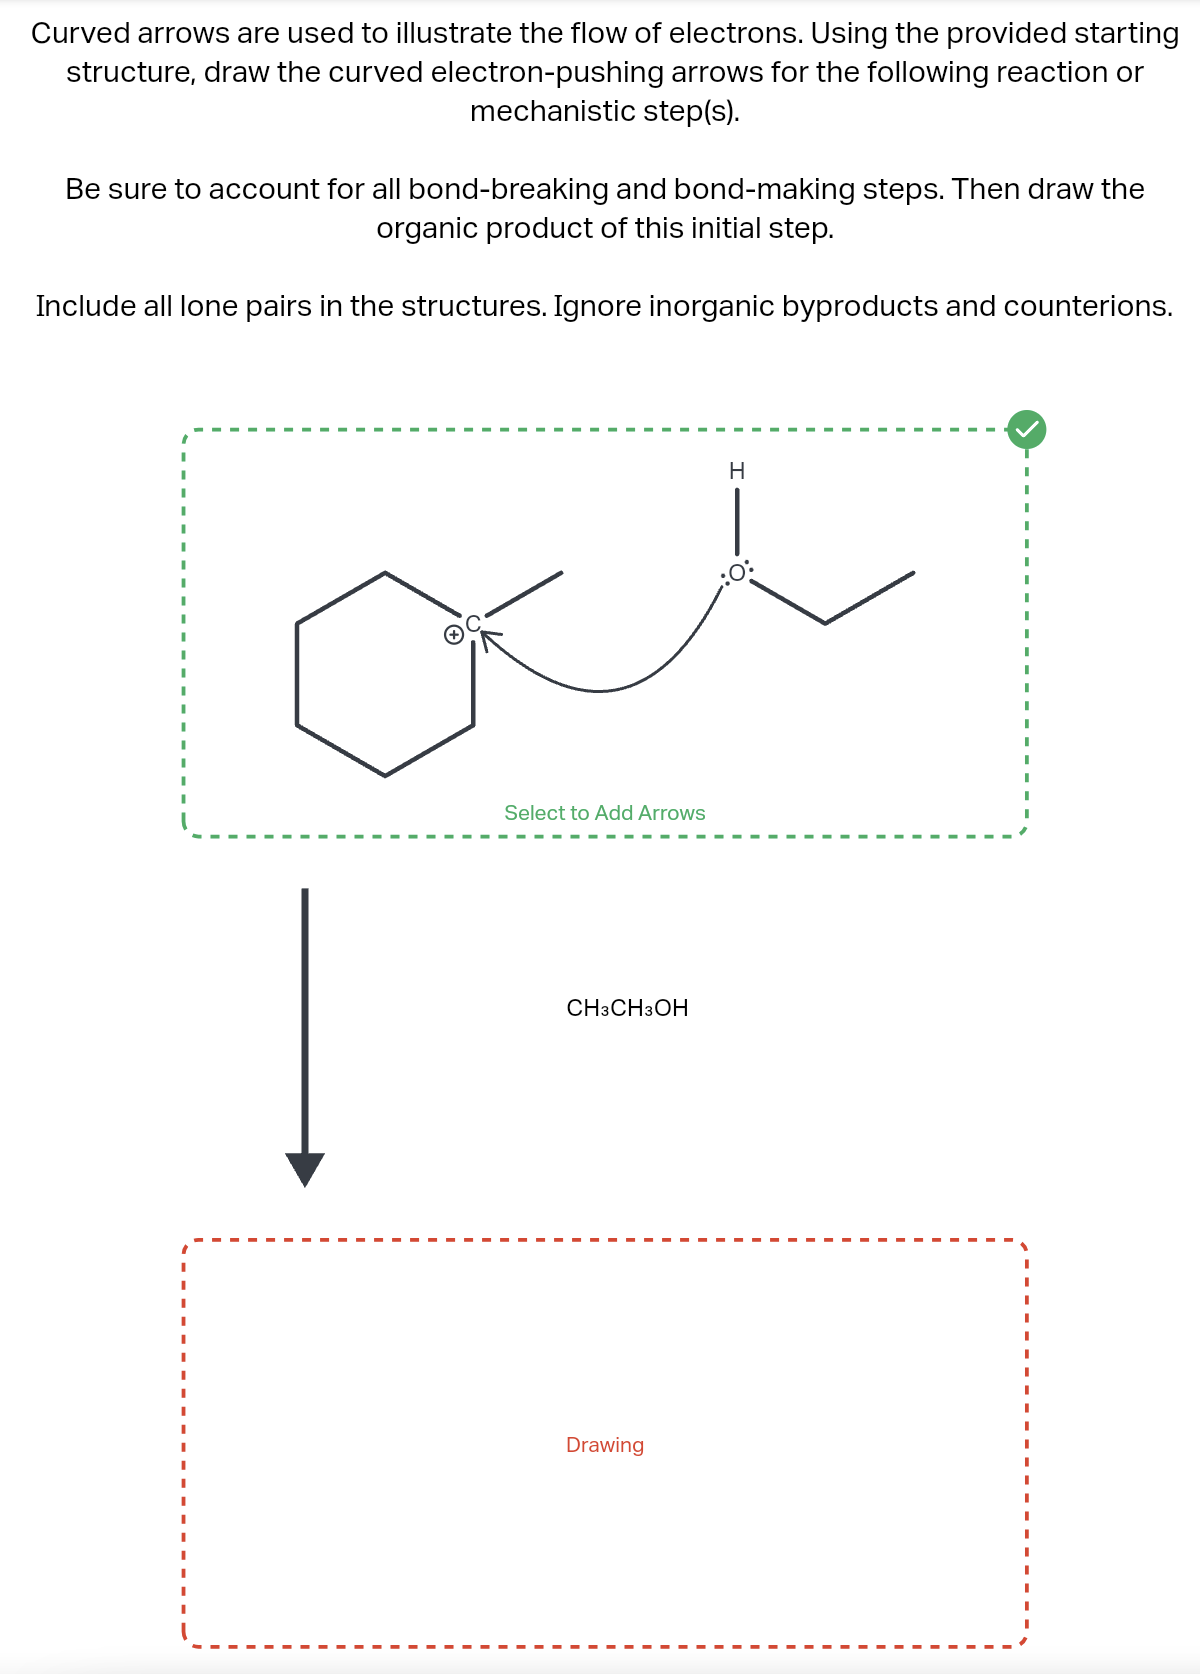 Curved arrows are used to illustrate the flow of electrons. Using the provided starting
structure, draw the curved electron-pushing arrows for the following reaction or
mechanistic step(s).
Be sure to account for all bond-breaking and bond-making steps. Then draw the
organic product of this initial step.
Include all lone pairs in the structures. Ignore inorganic byproducts and counterions.
Select to Add Arrows
CH3 CH3OH
Drawing
H
I